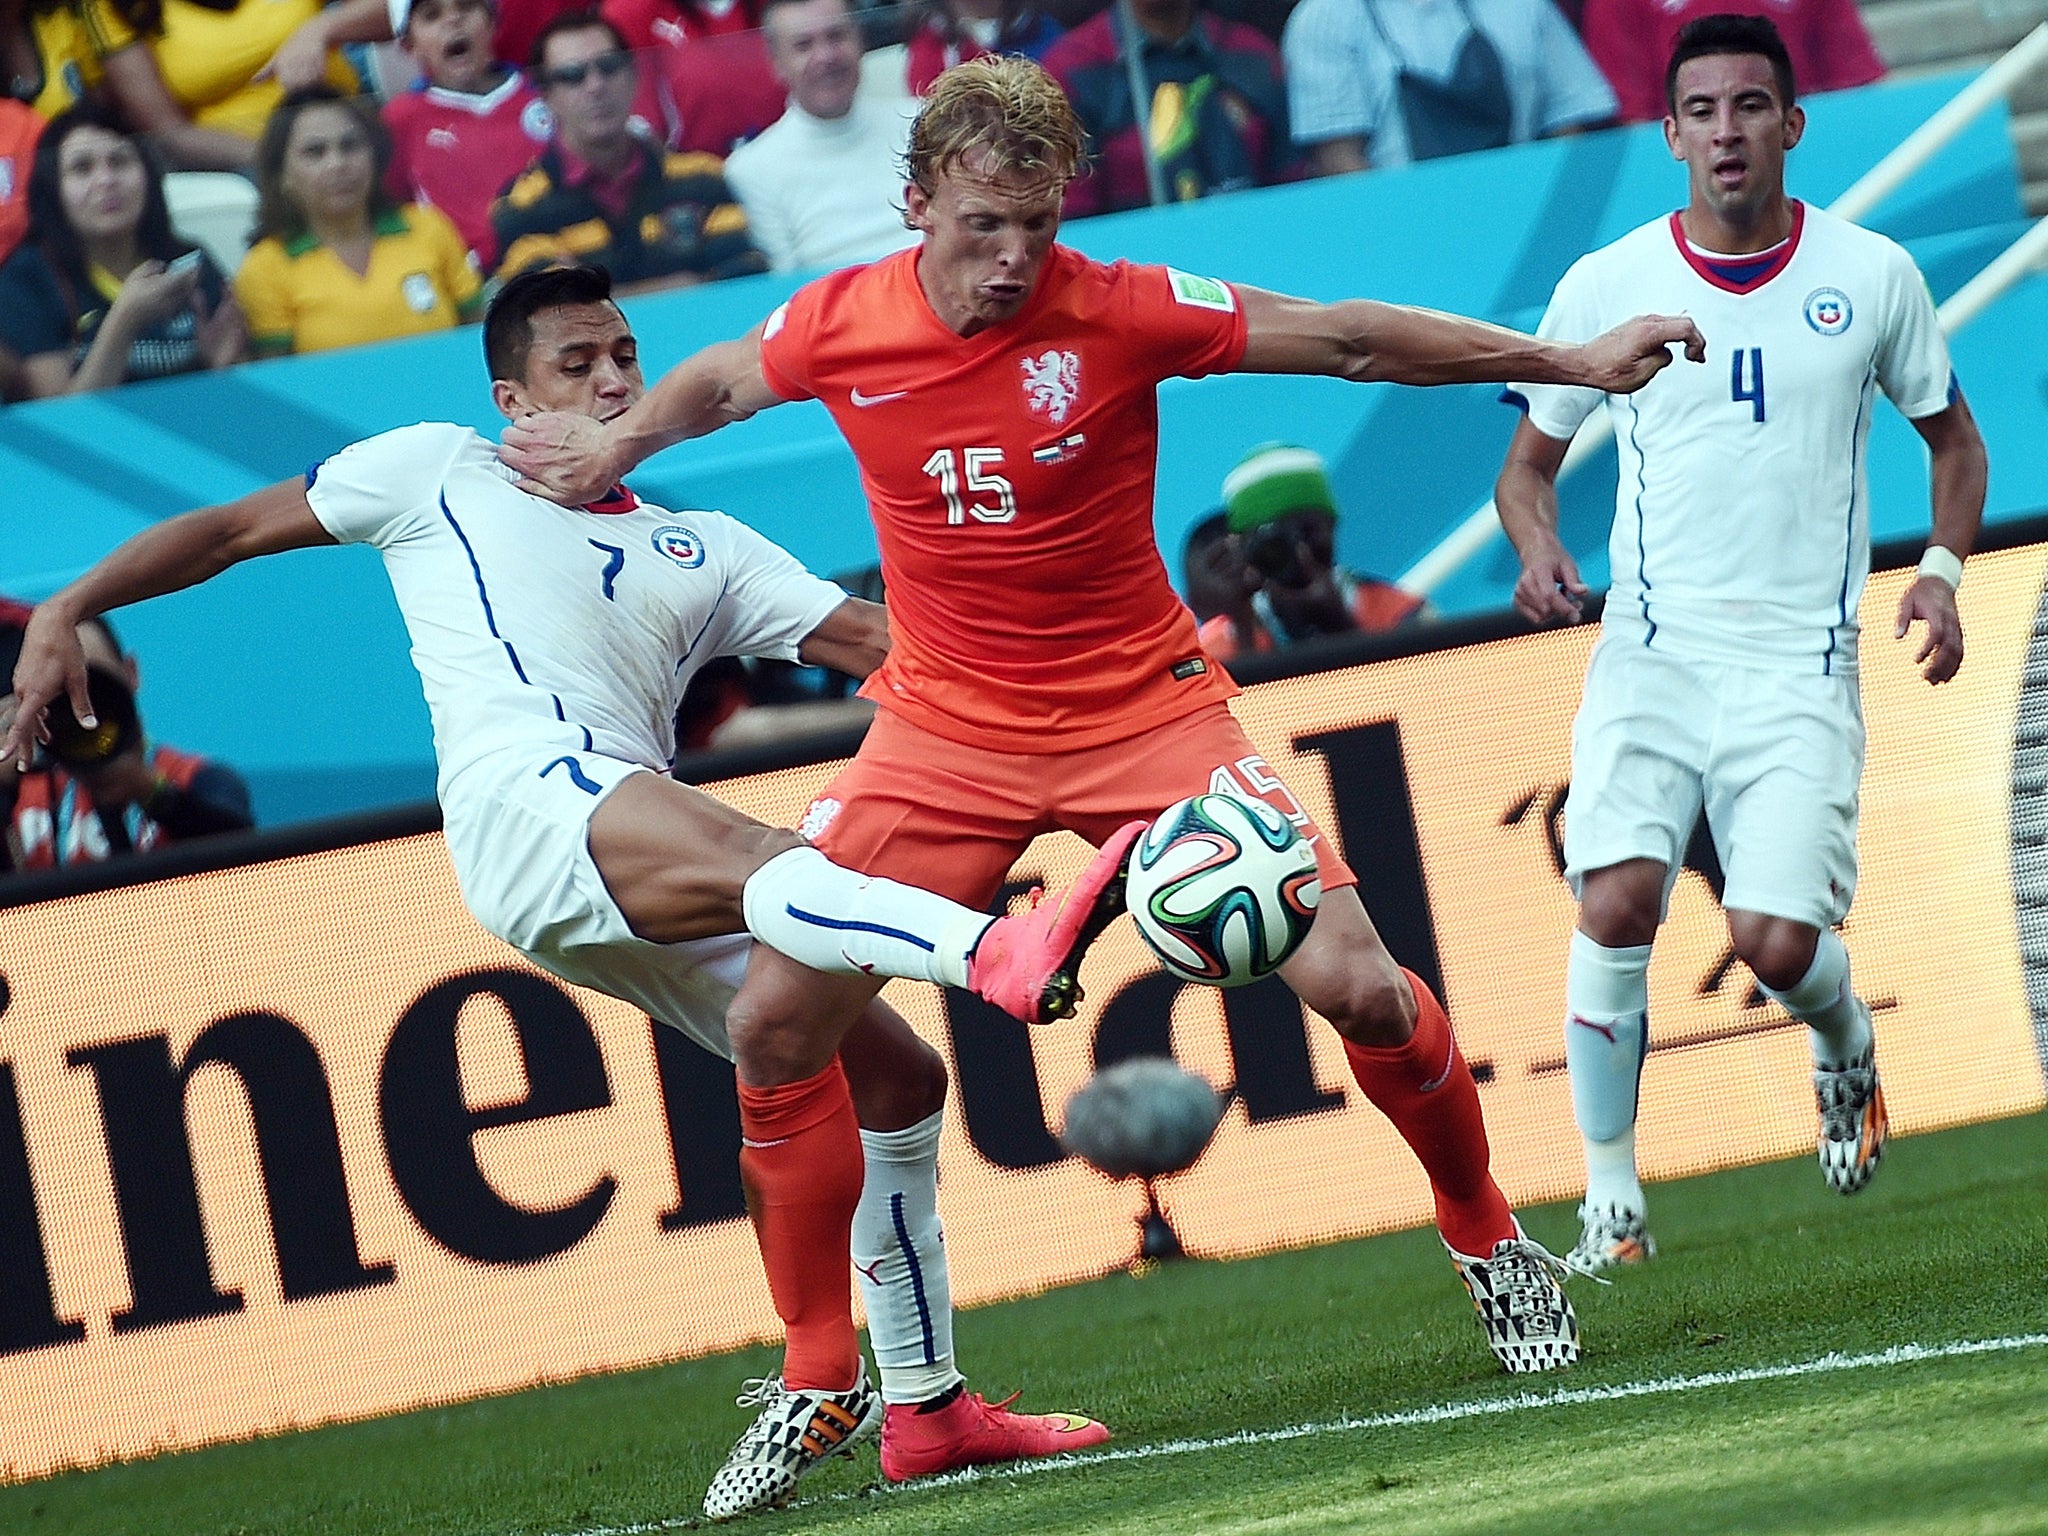 Dirk Kuyt in action for the Netherlands at the World Cup